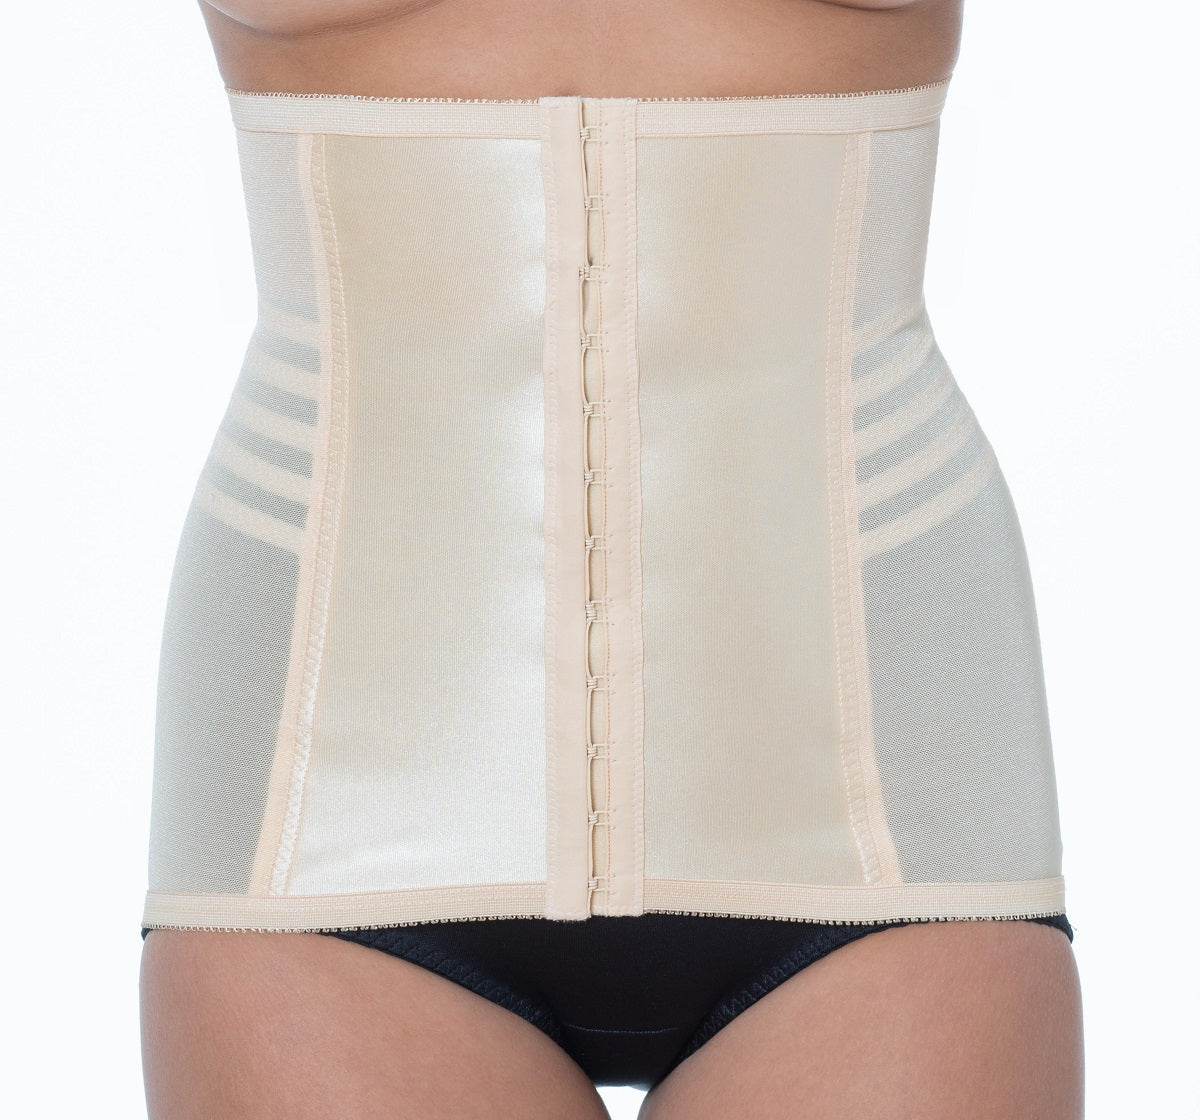 Shop for Rago Shapewear, Body Shapers and Lingerie